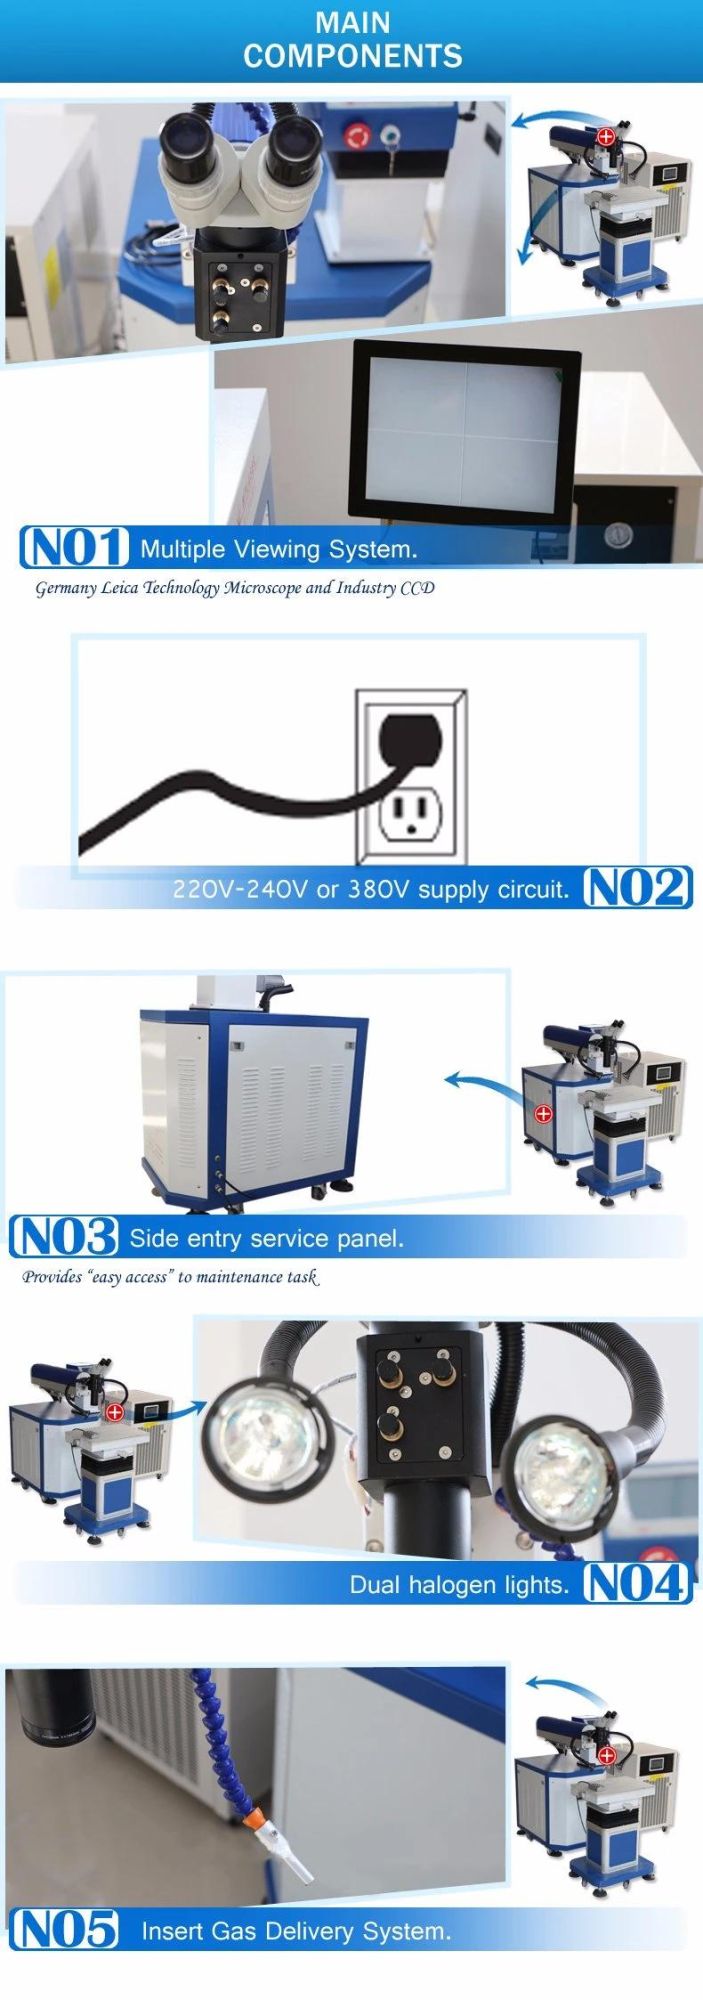 2018 Automatic Laser Perfect Mold Repair Welding and Welder Machine